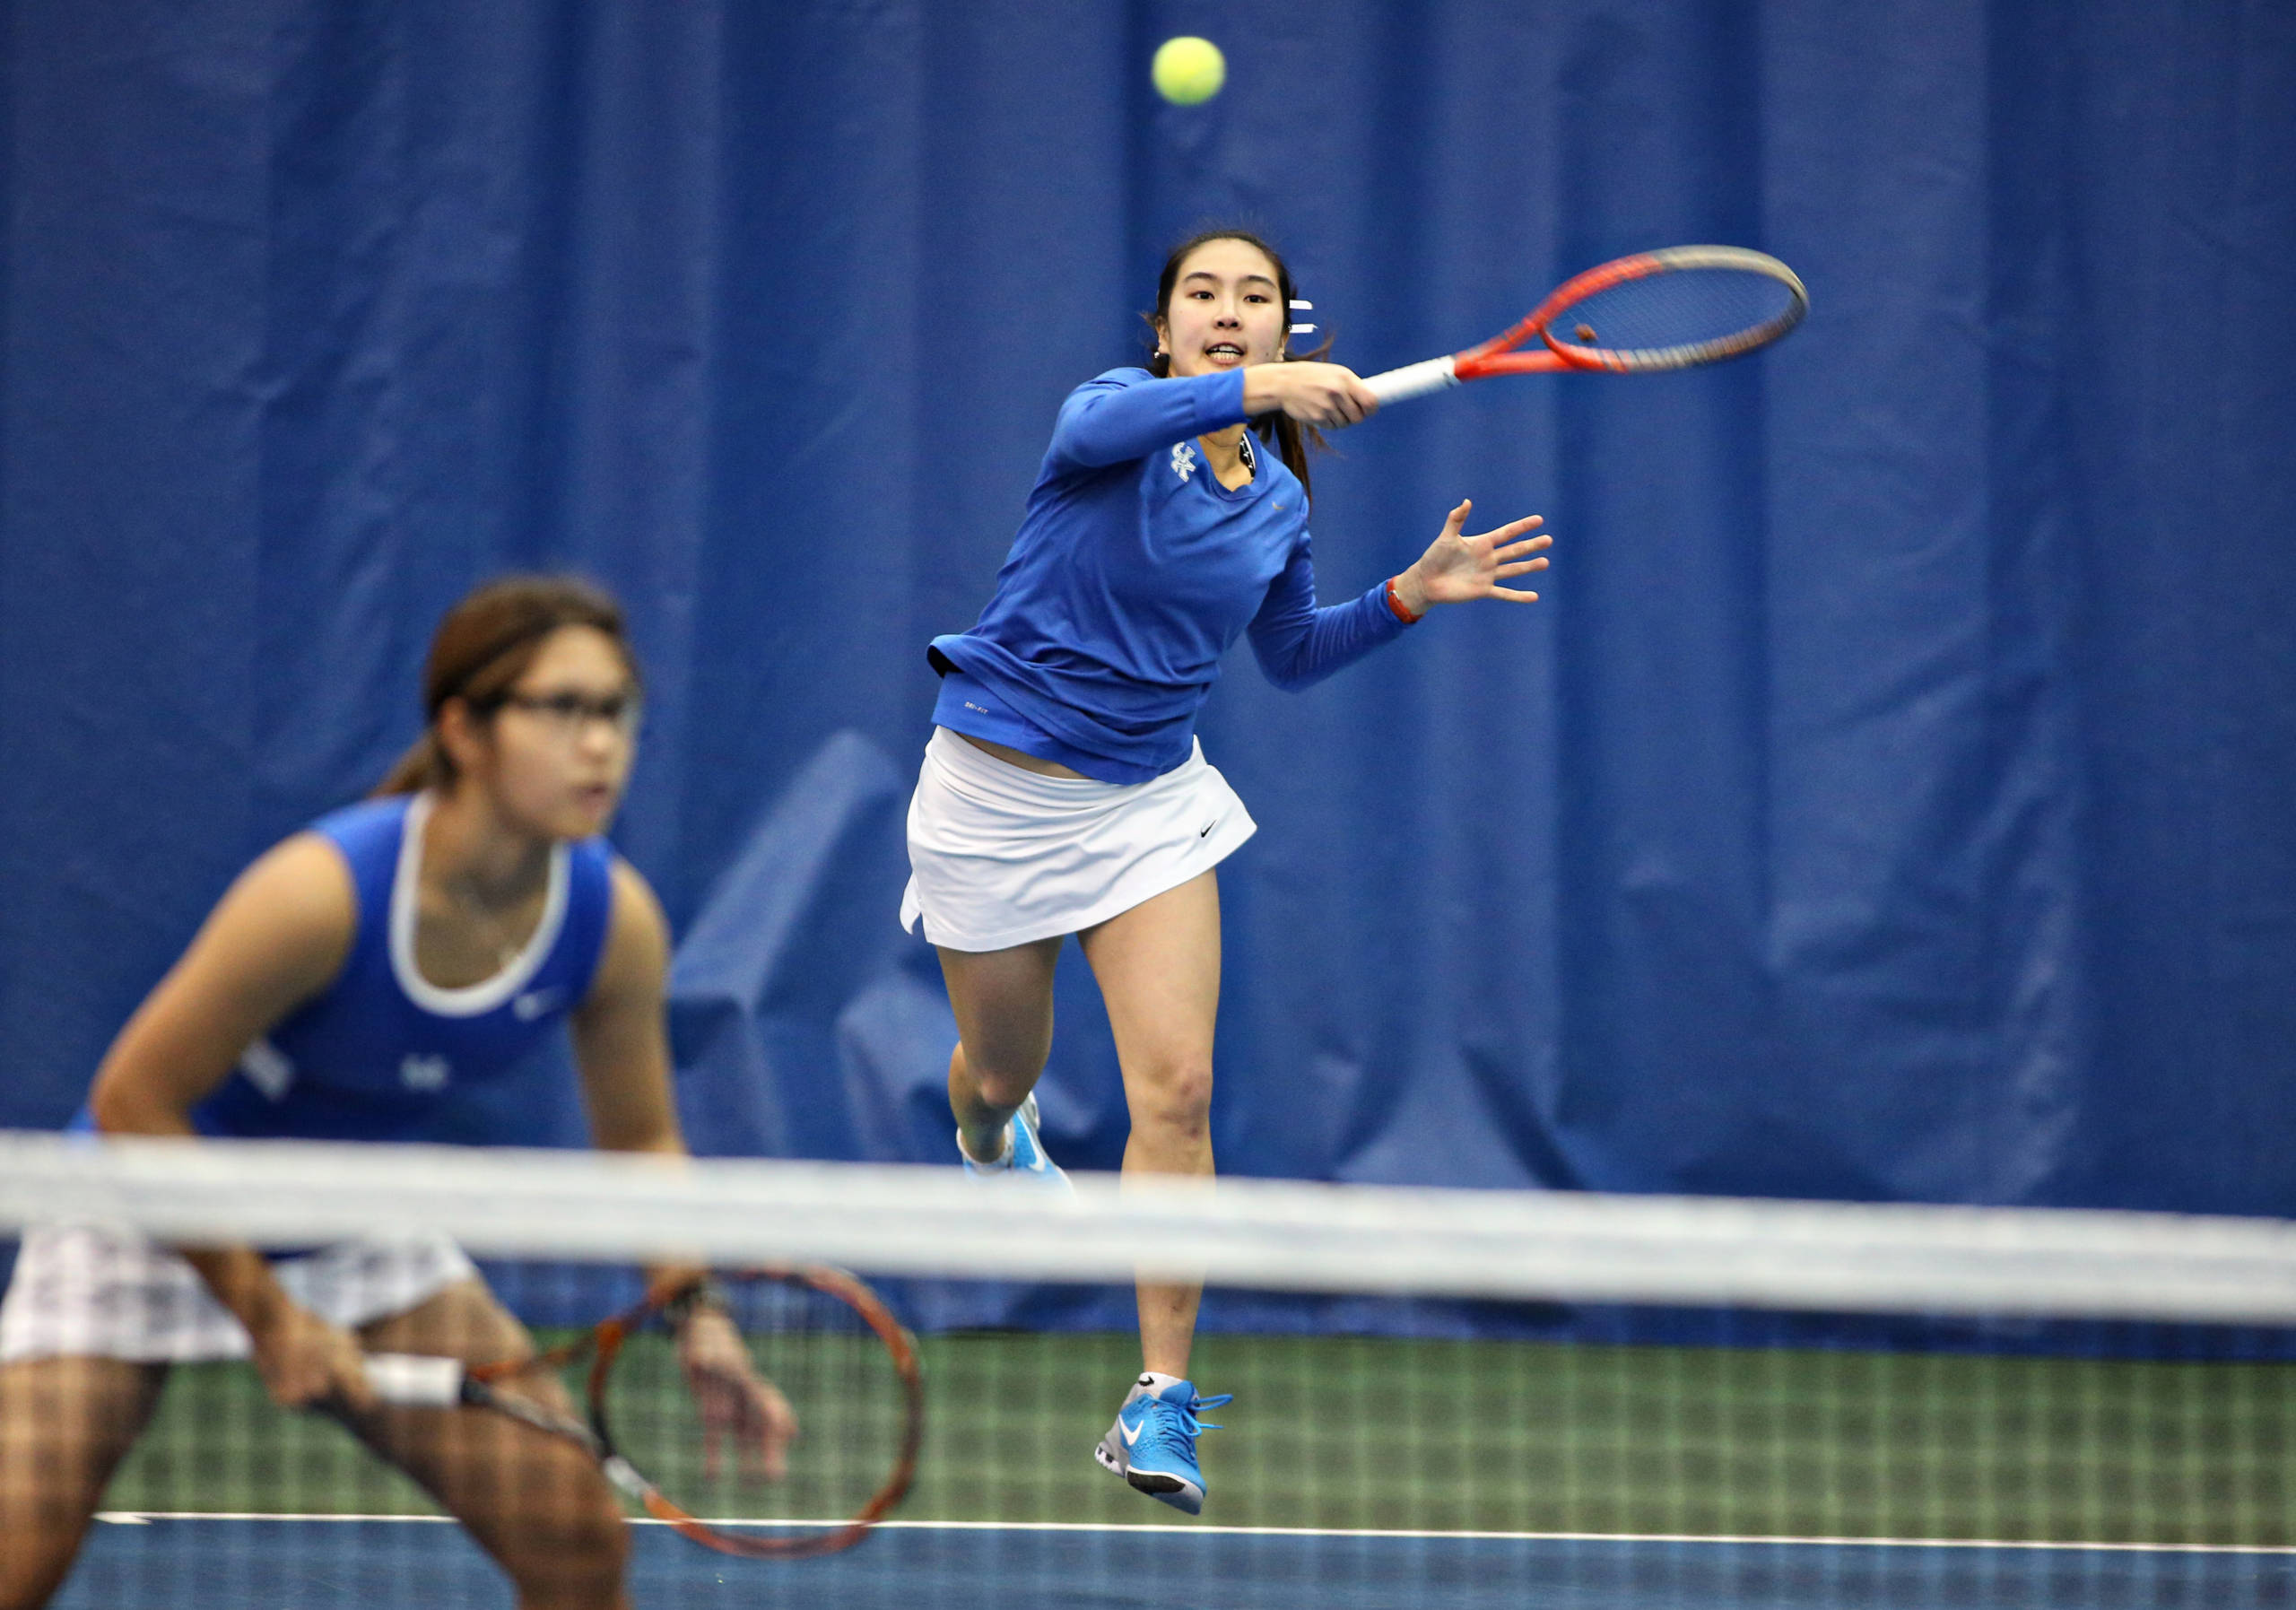 UK Doubles Advance to National Championship of Oracle/ITA Masters